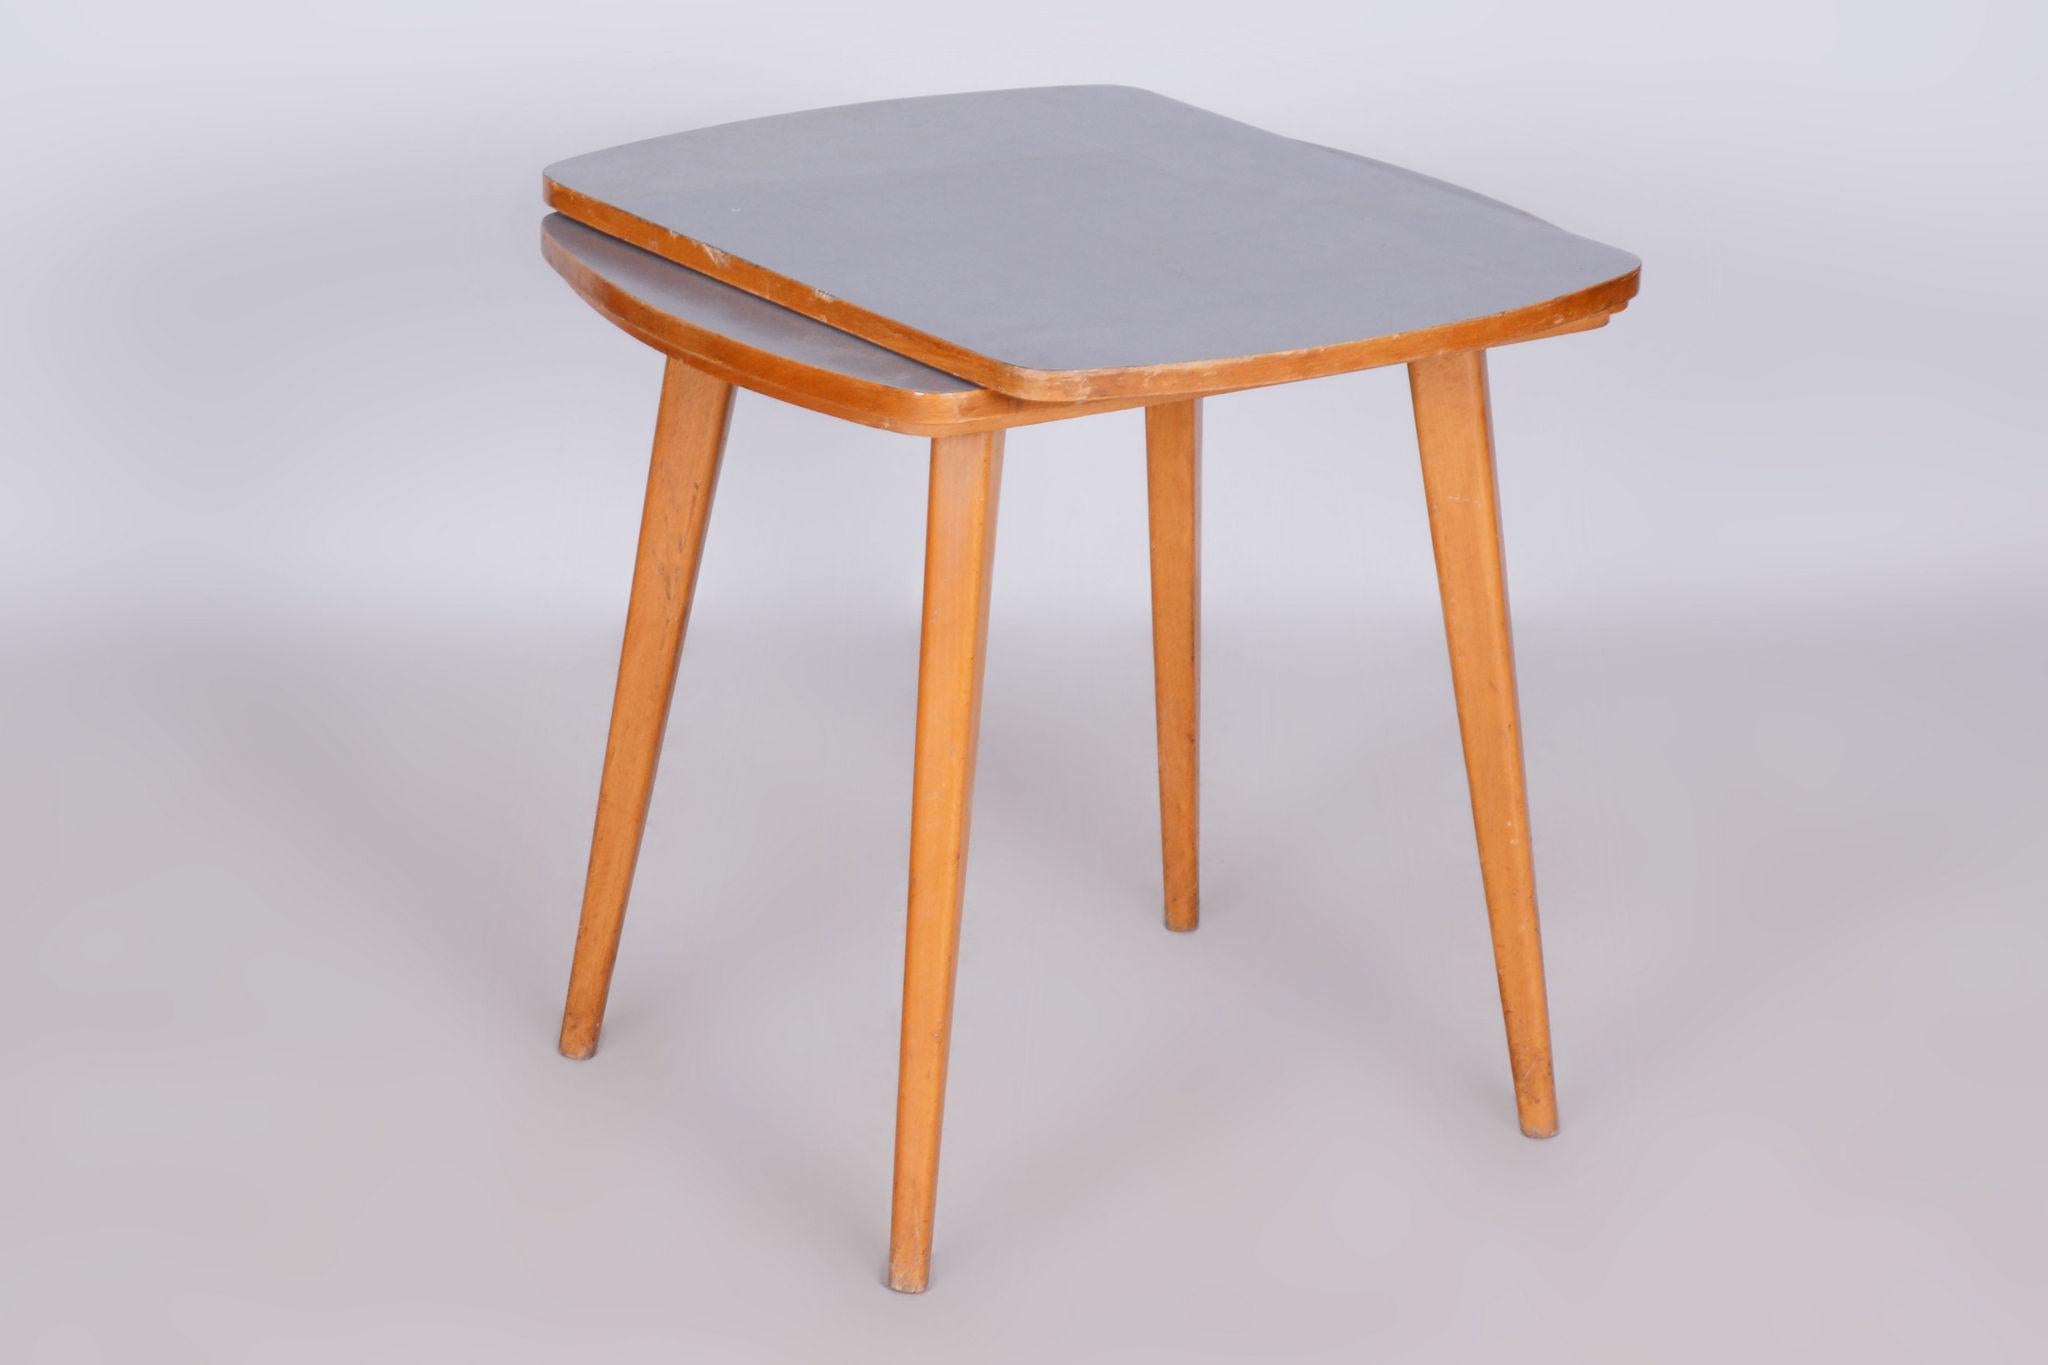 Restored MidCentury Coffee Table, Beech, Umakart, Revived Polish, Czechia, 1950s In Good Condition For Sale In Horomerice, CZ